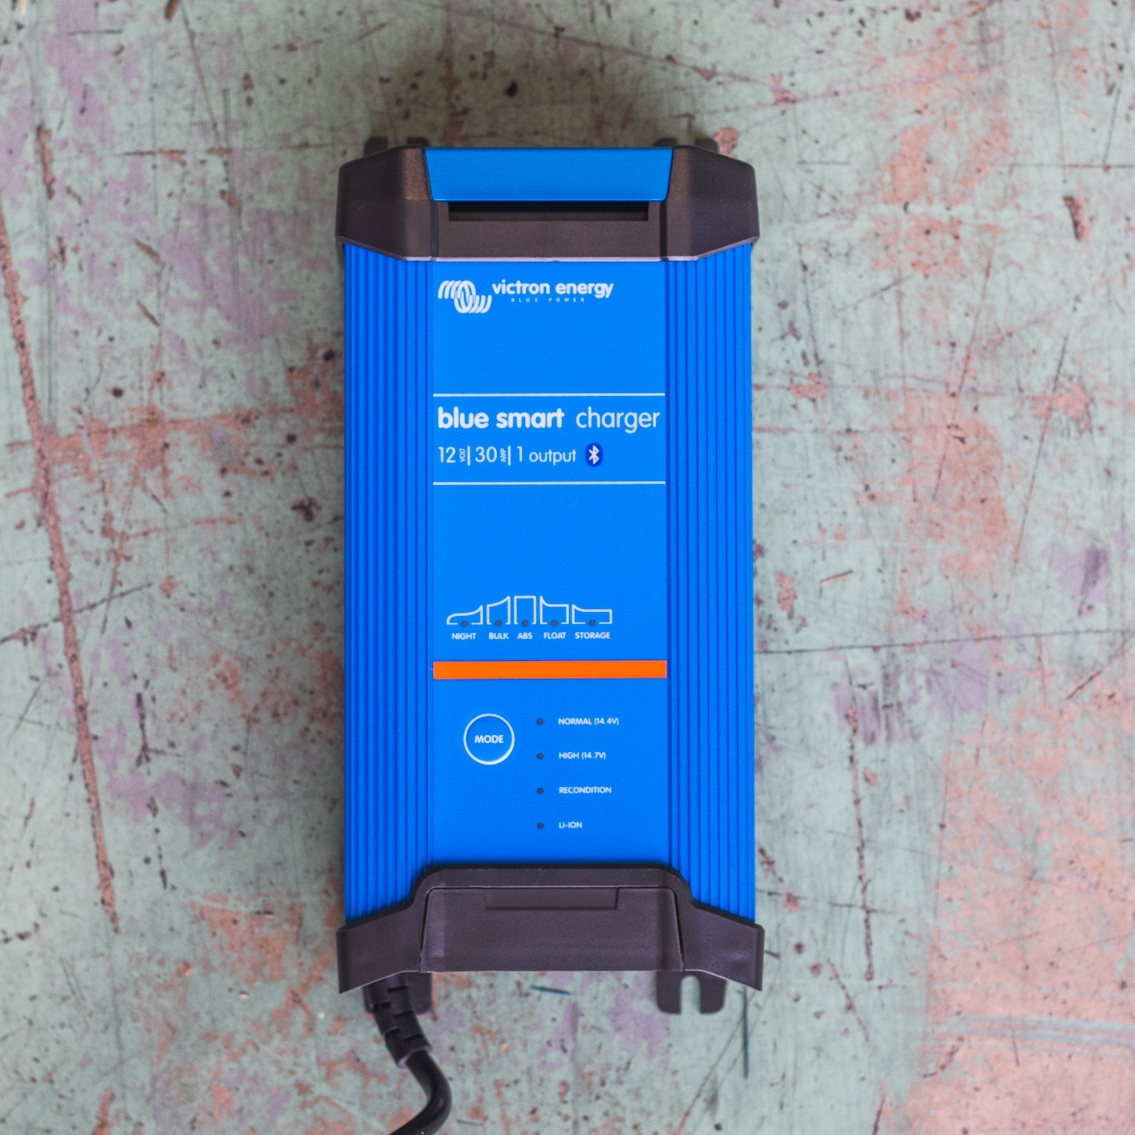 A blue Victron Battery Charger 12/30 - Indoor (IP22) Blue Smart - 1 Output rests on a worn, painted surface.